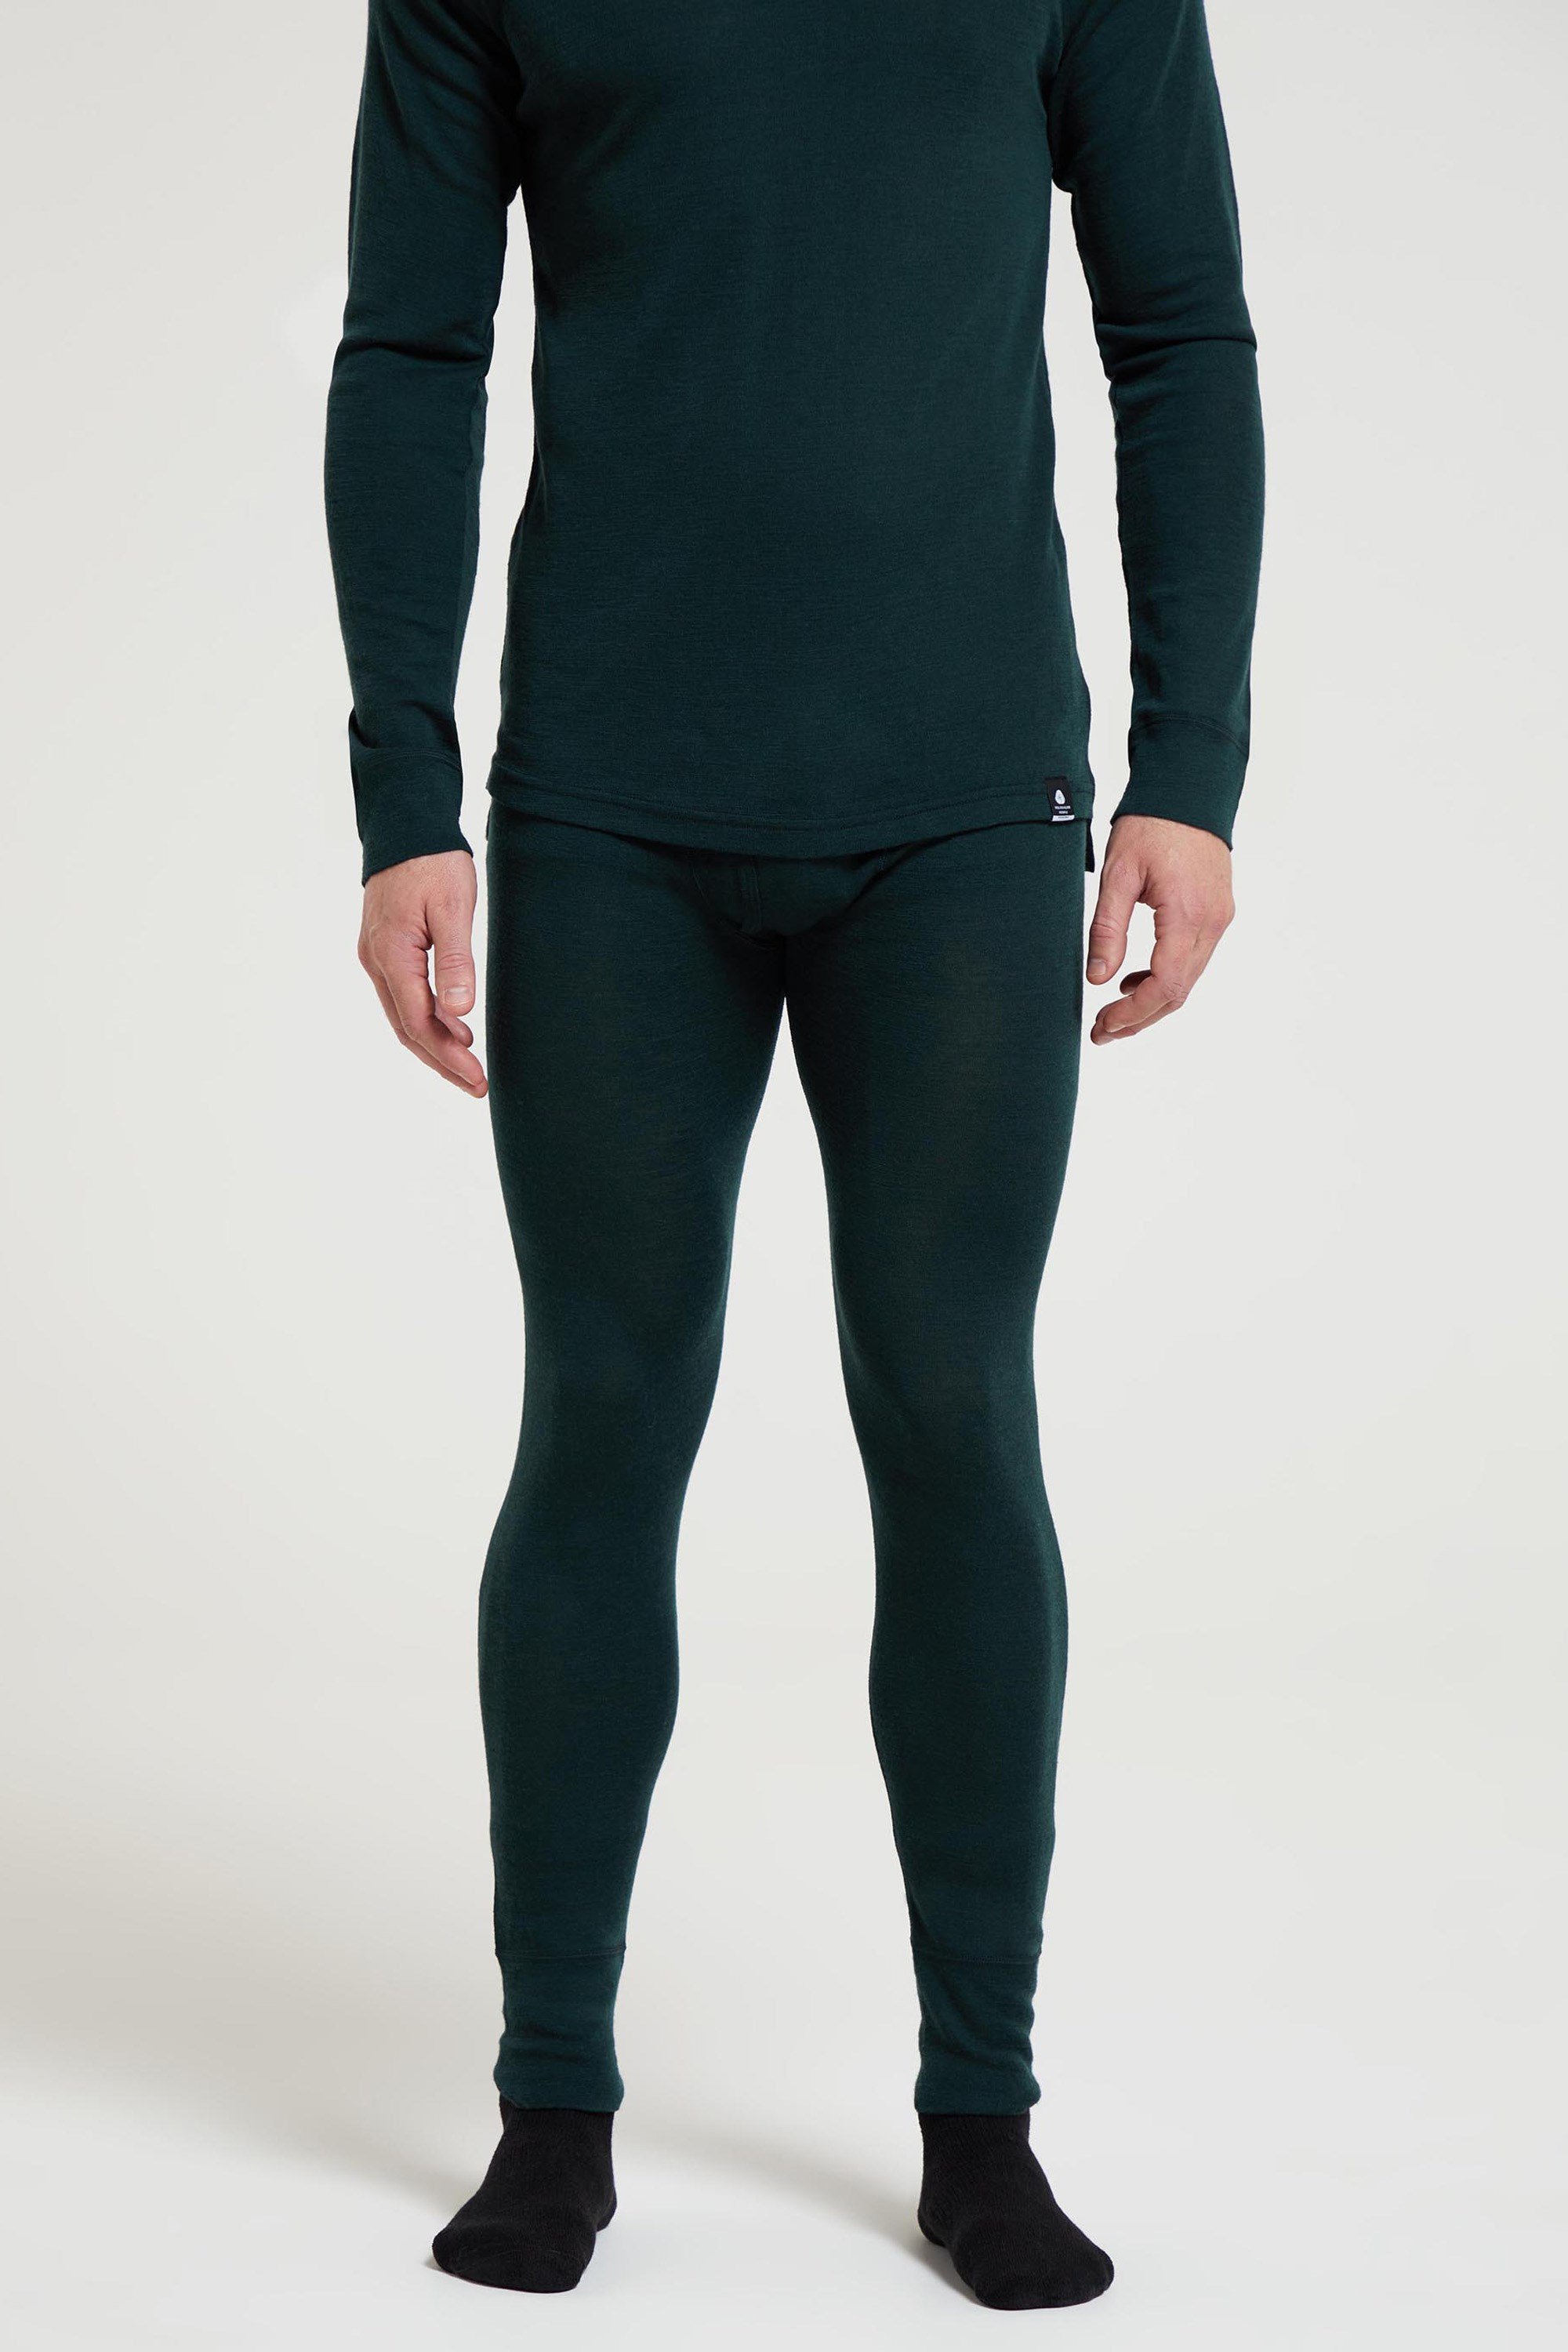 Mens Thermal Underwear Men Merino Wool 250G Base Layer Crew Shirt 100% Merino  Wool Thermal Underwear Top Long Sleeve Baselayer Breathable USA Size 231220  From Diao03, $36.66